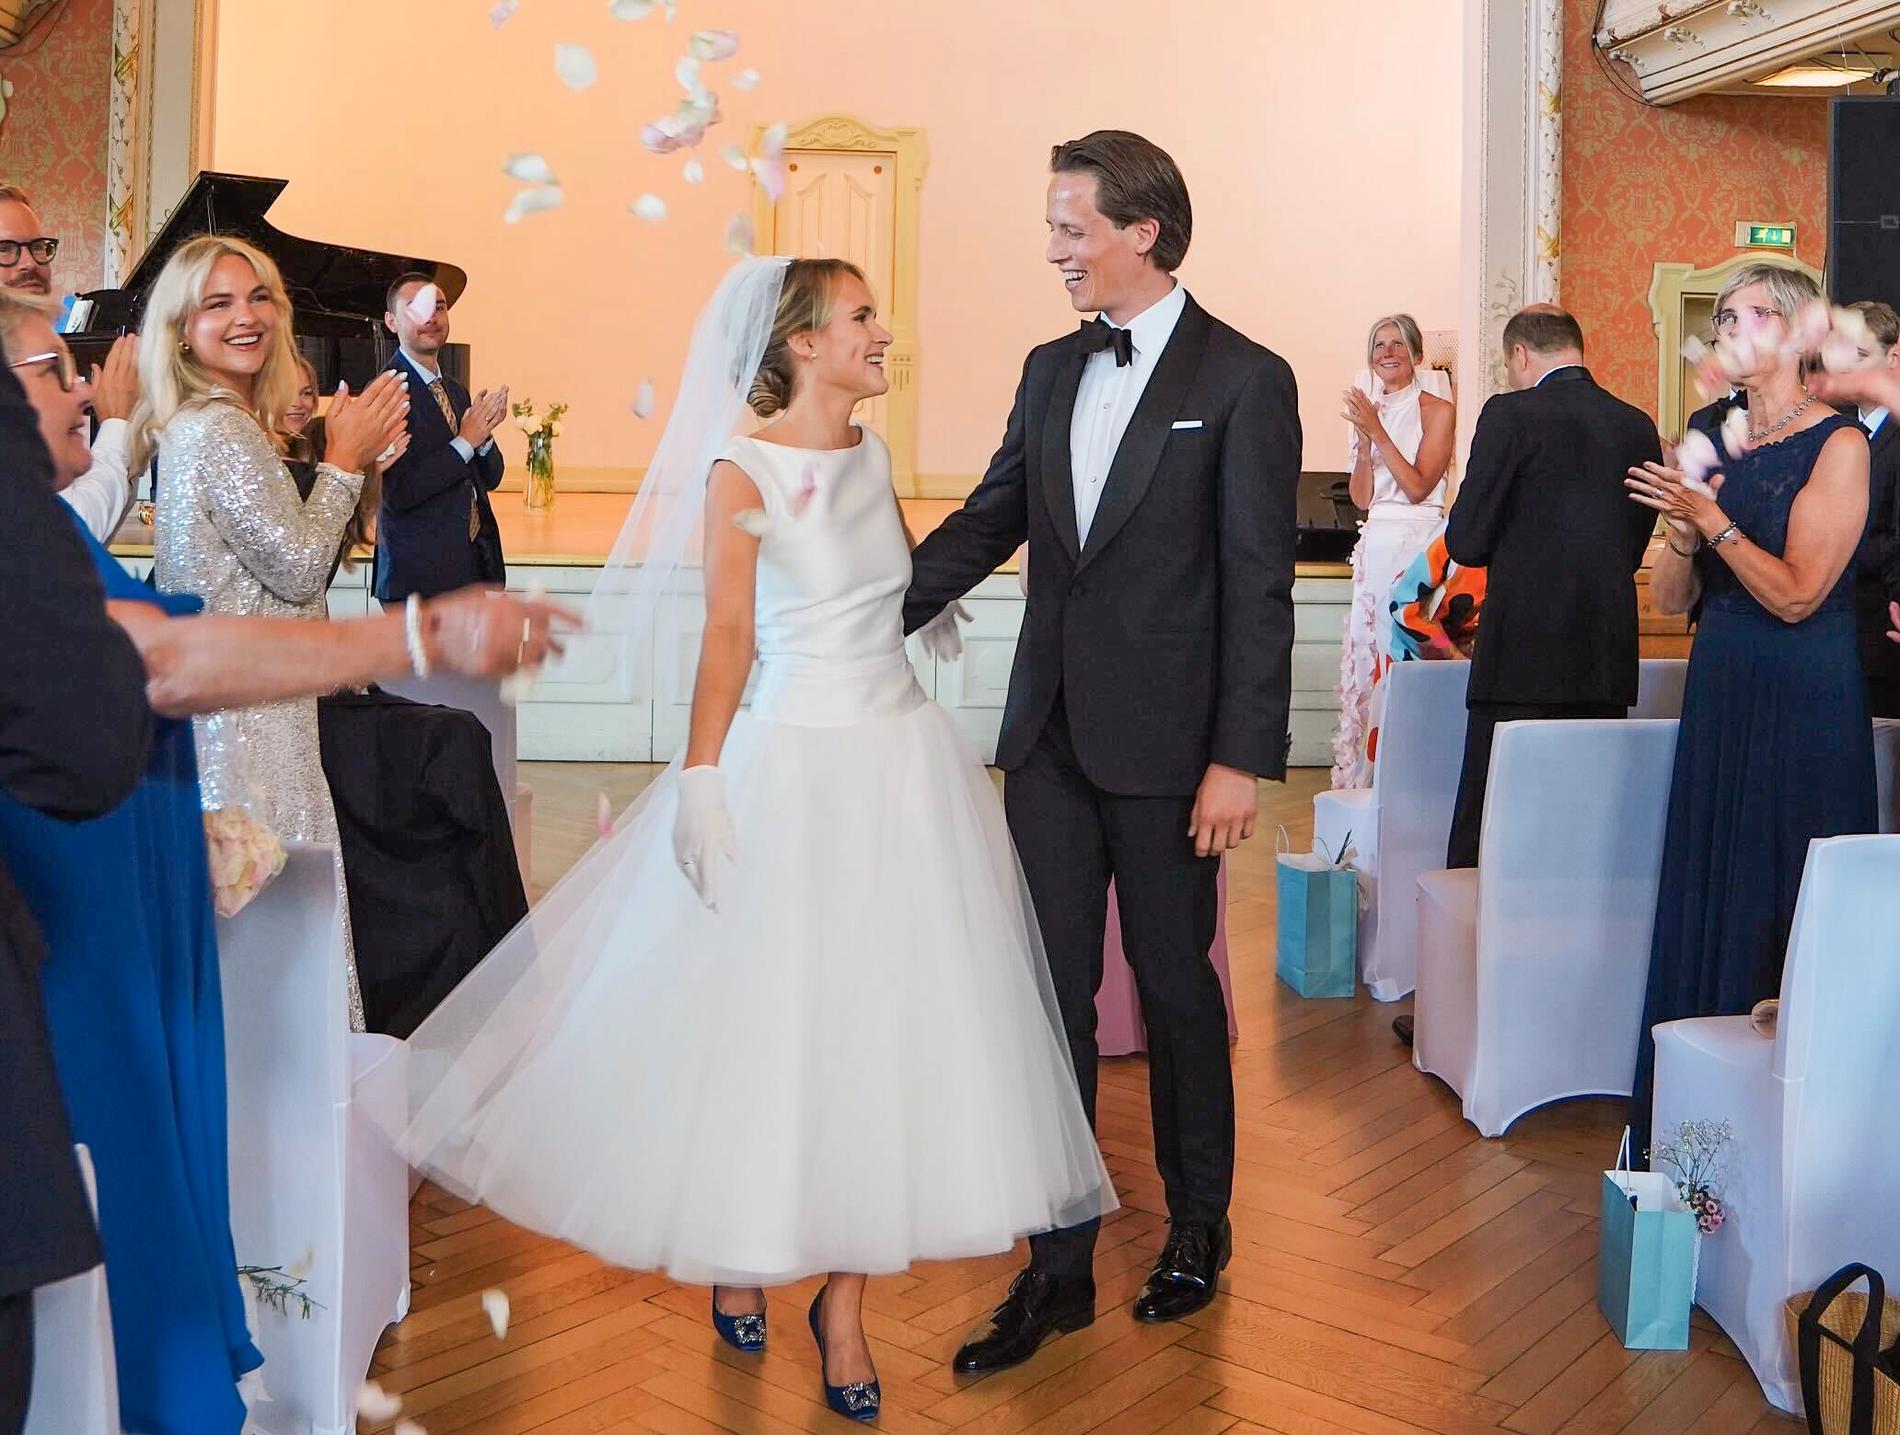 Emil Geld after the wedding with Lenny Myhry: – The best day of my life